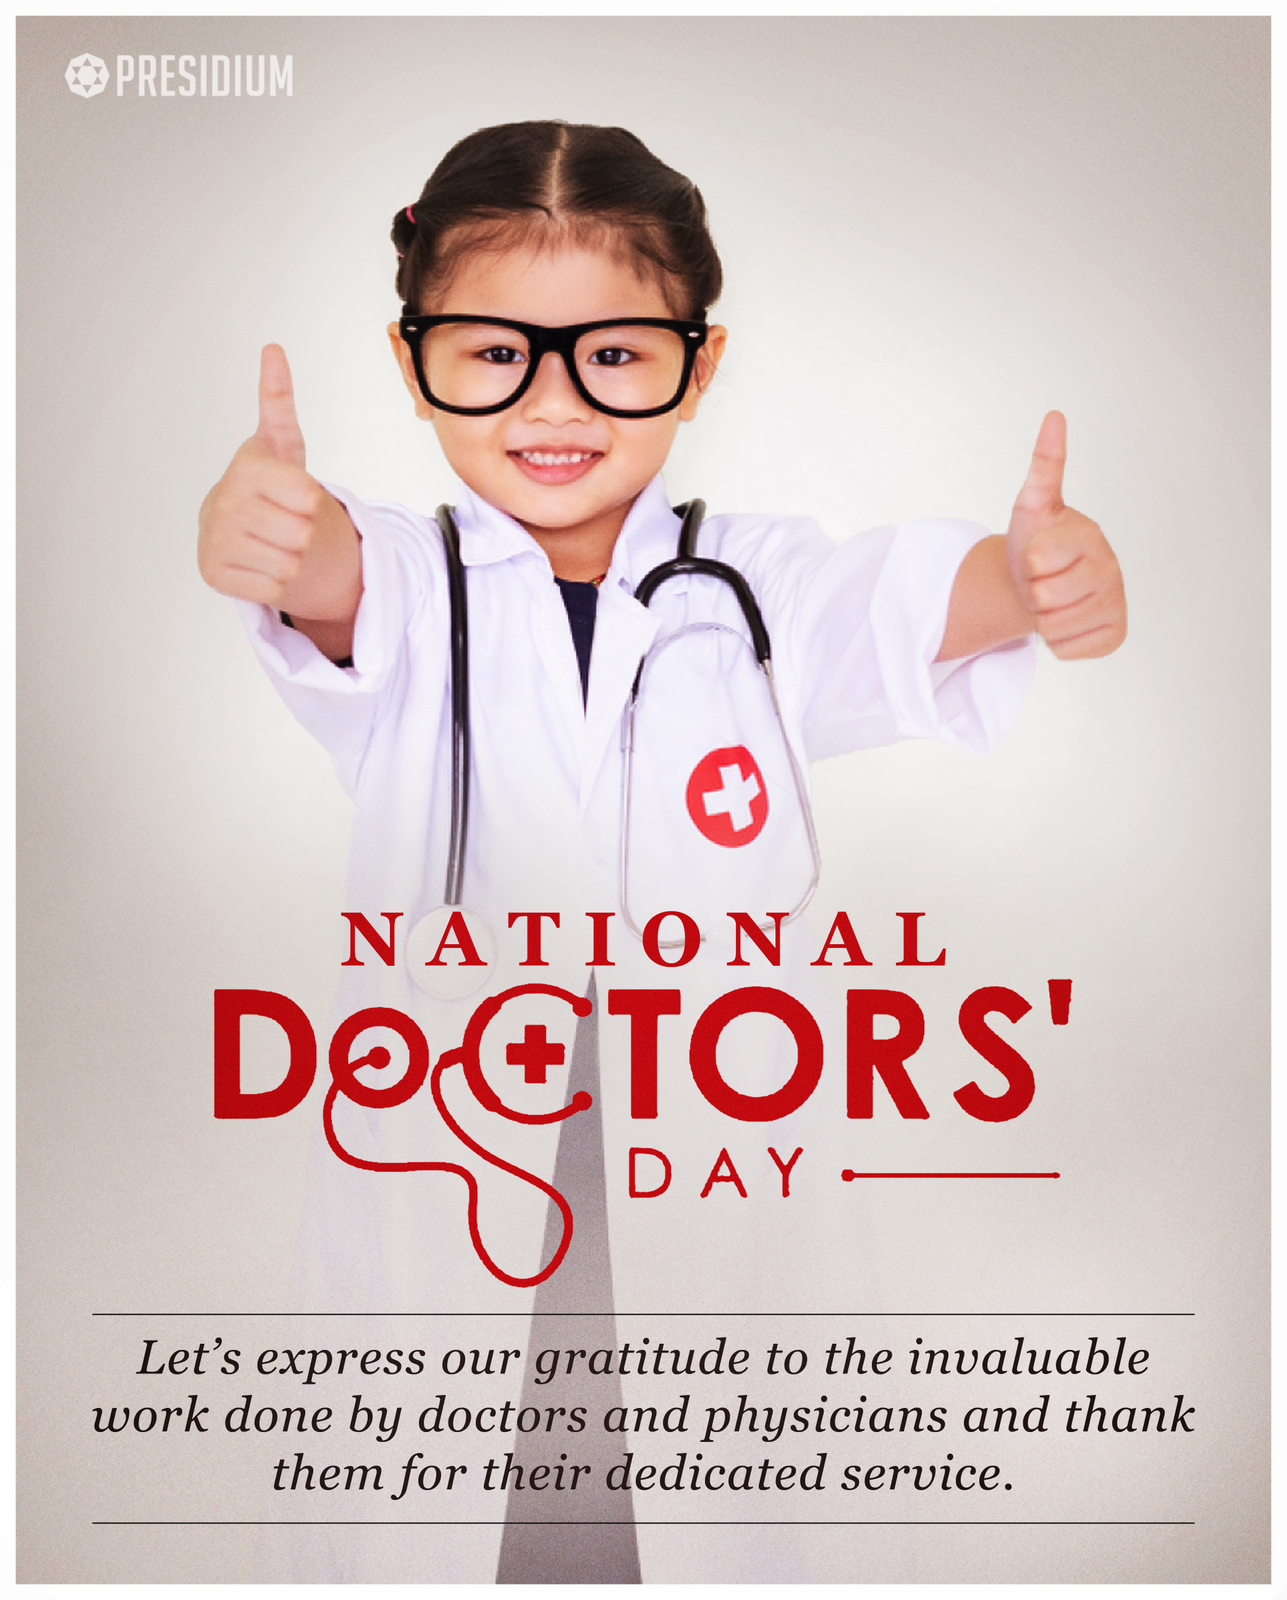 THANKING THE DOCTORS WHO RISK THEIR OWN HEALTH TO SAFEGUARD OURS!